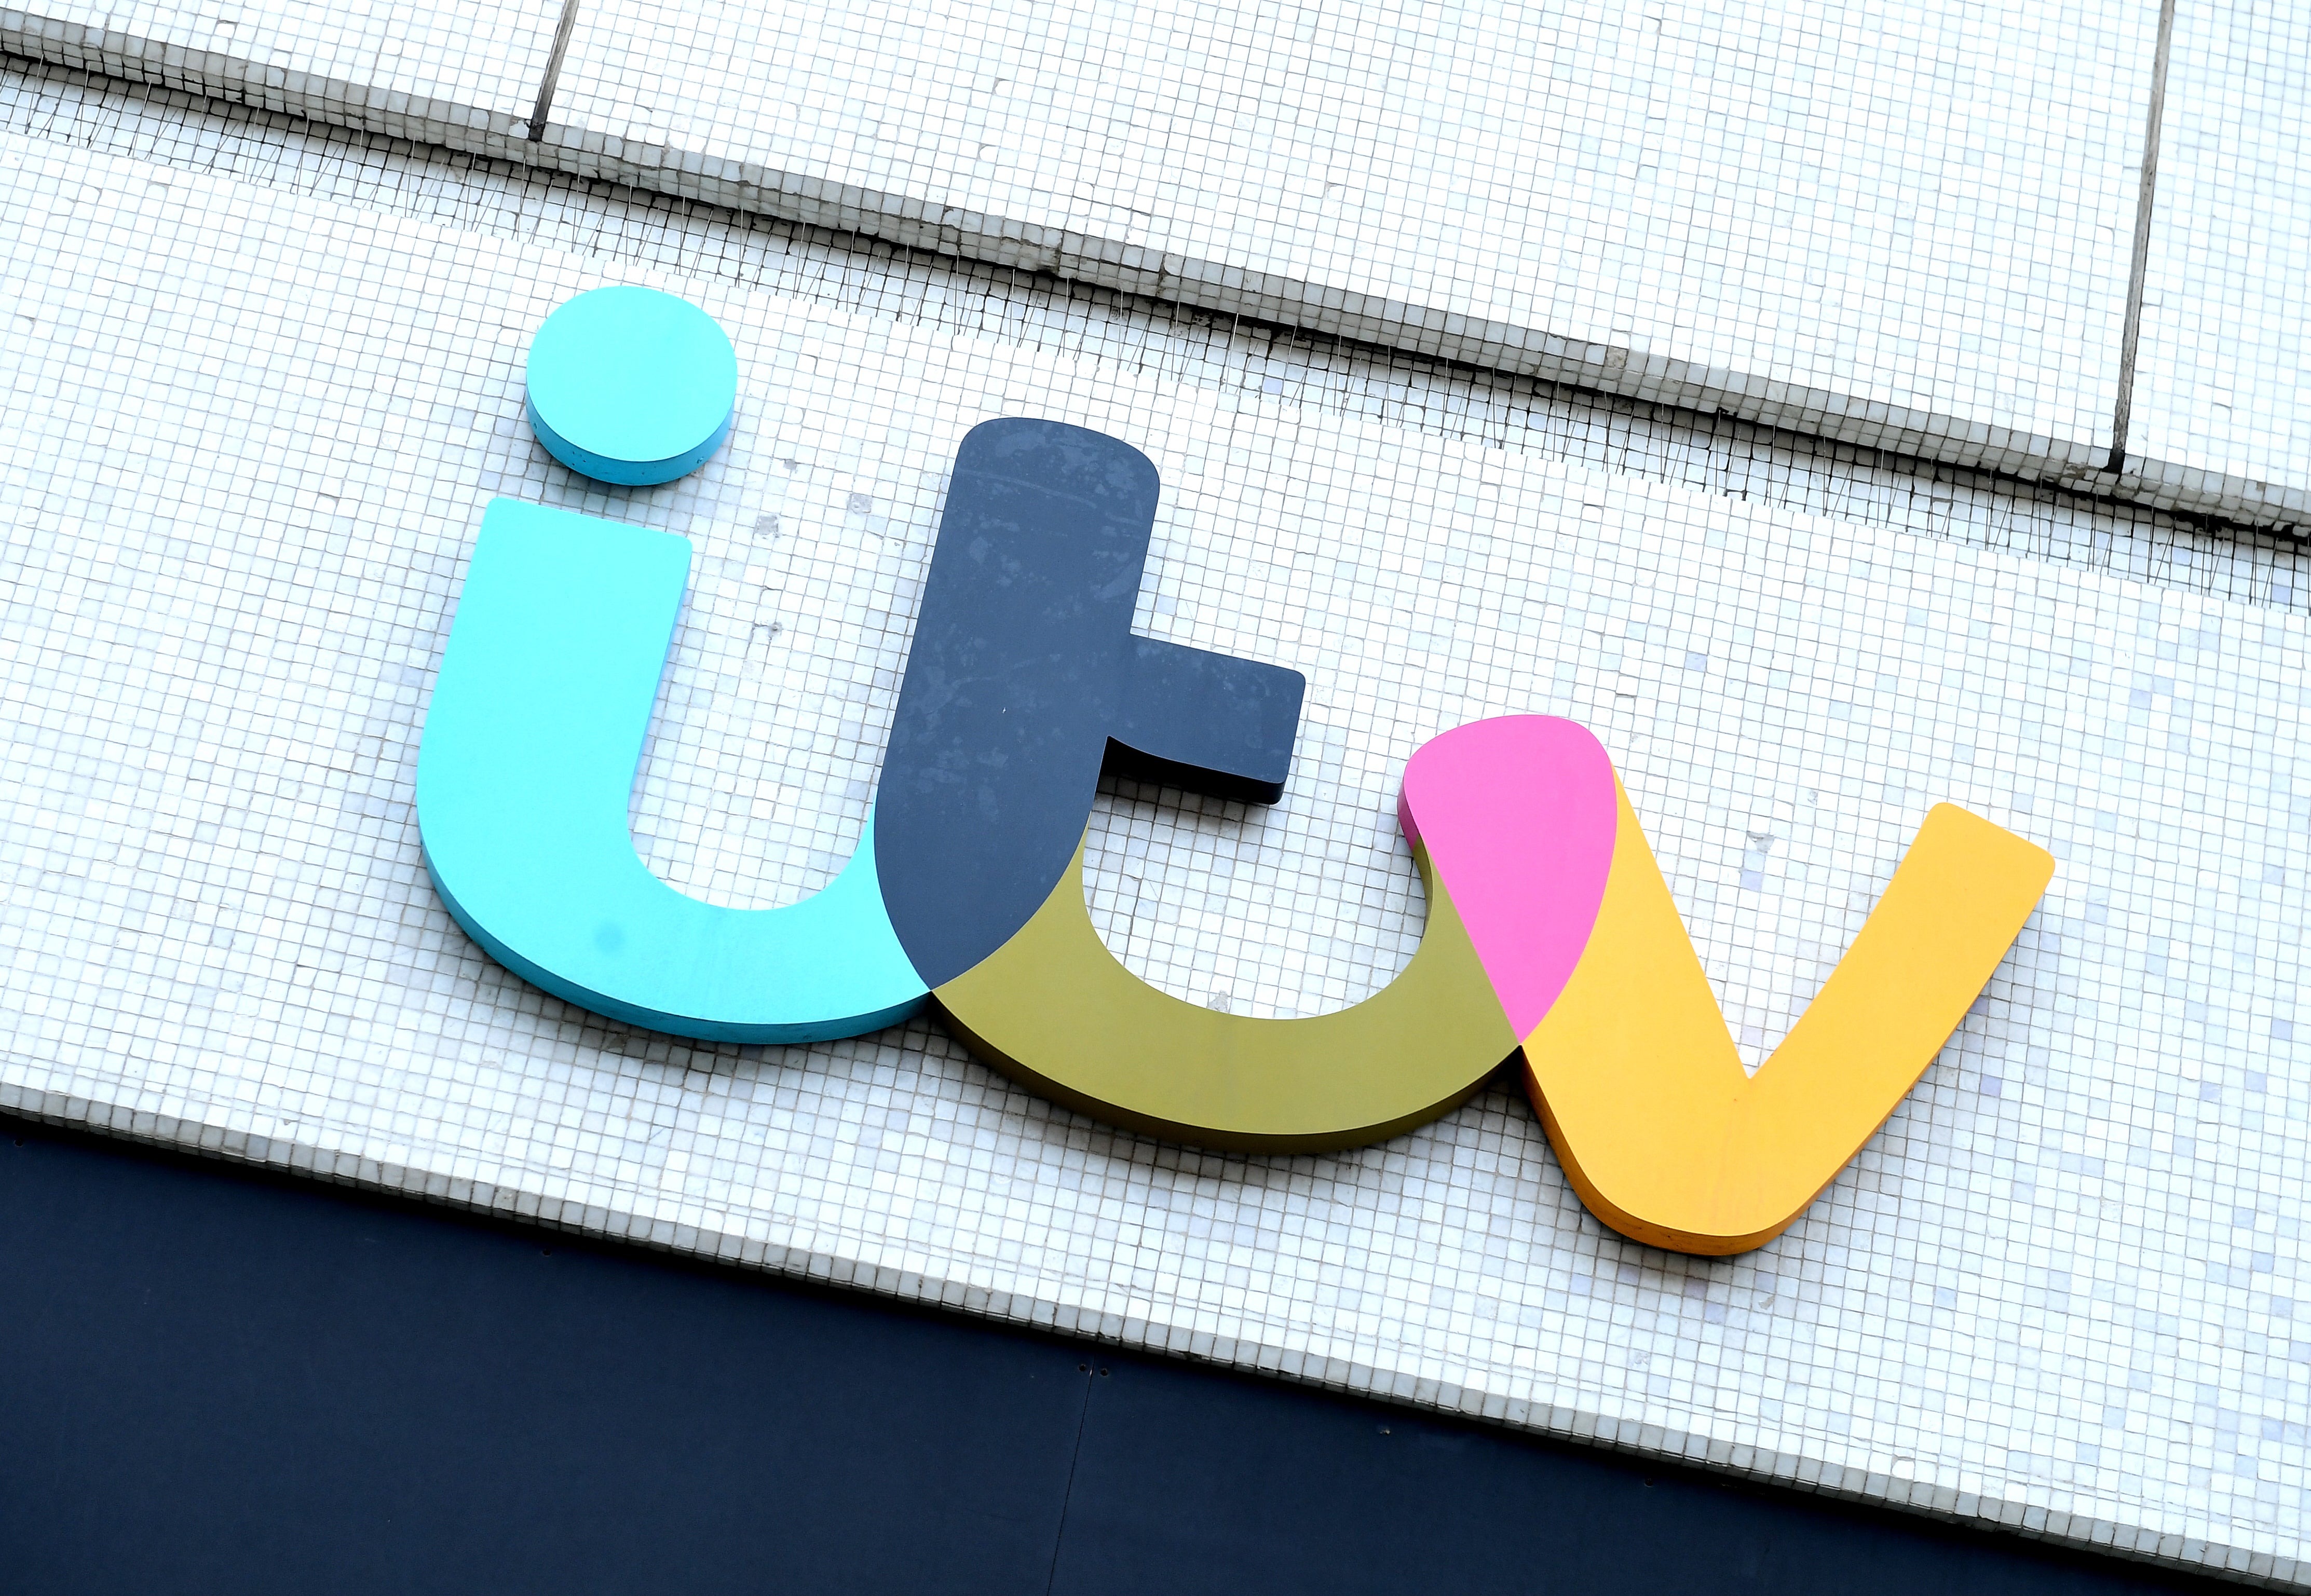 Broadcasting giant ITV has said the worst of the pandemic impact is behind it as the group revealed a strong advertising rebound, with the Euros helping it to a record performance last month.